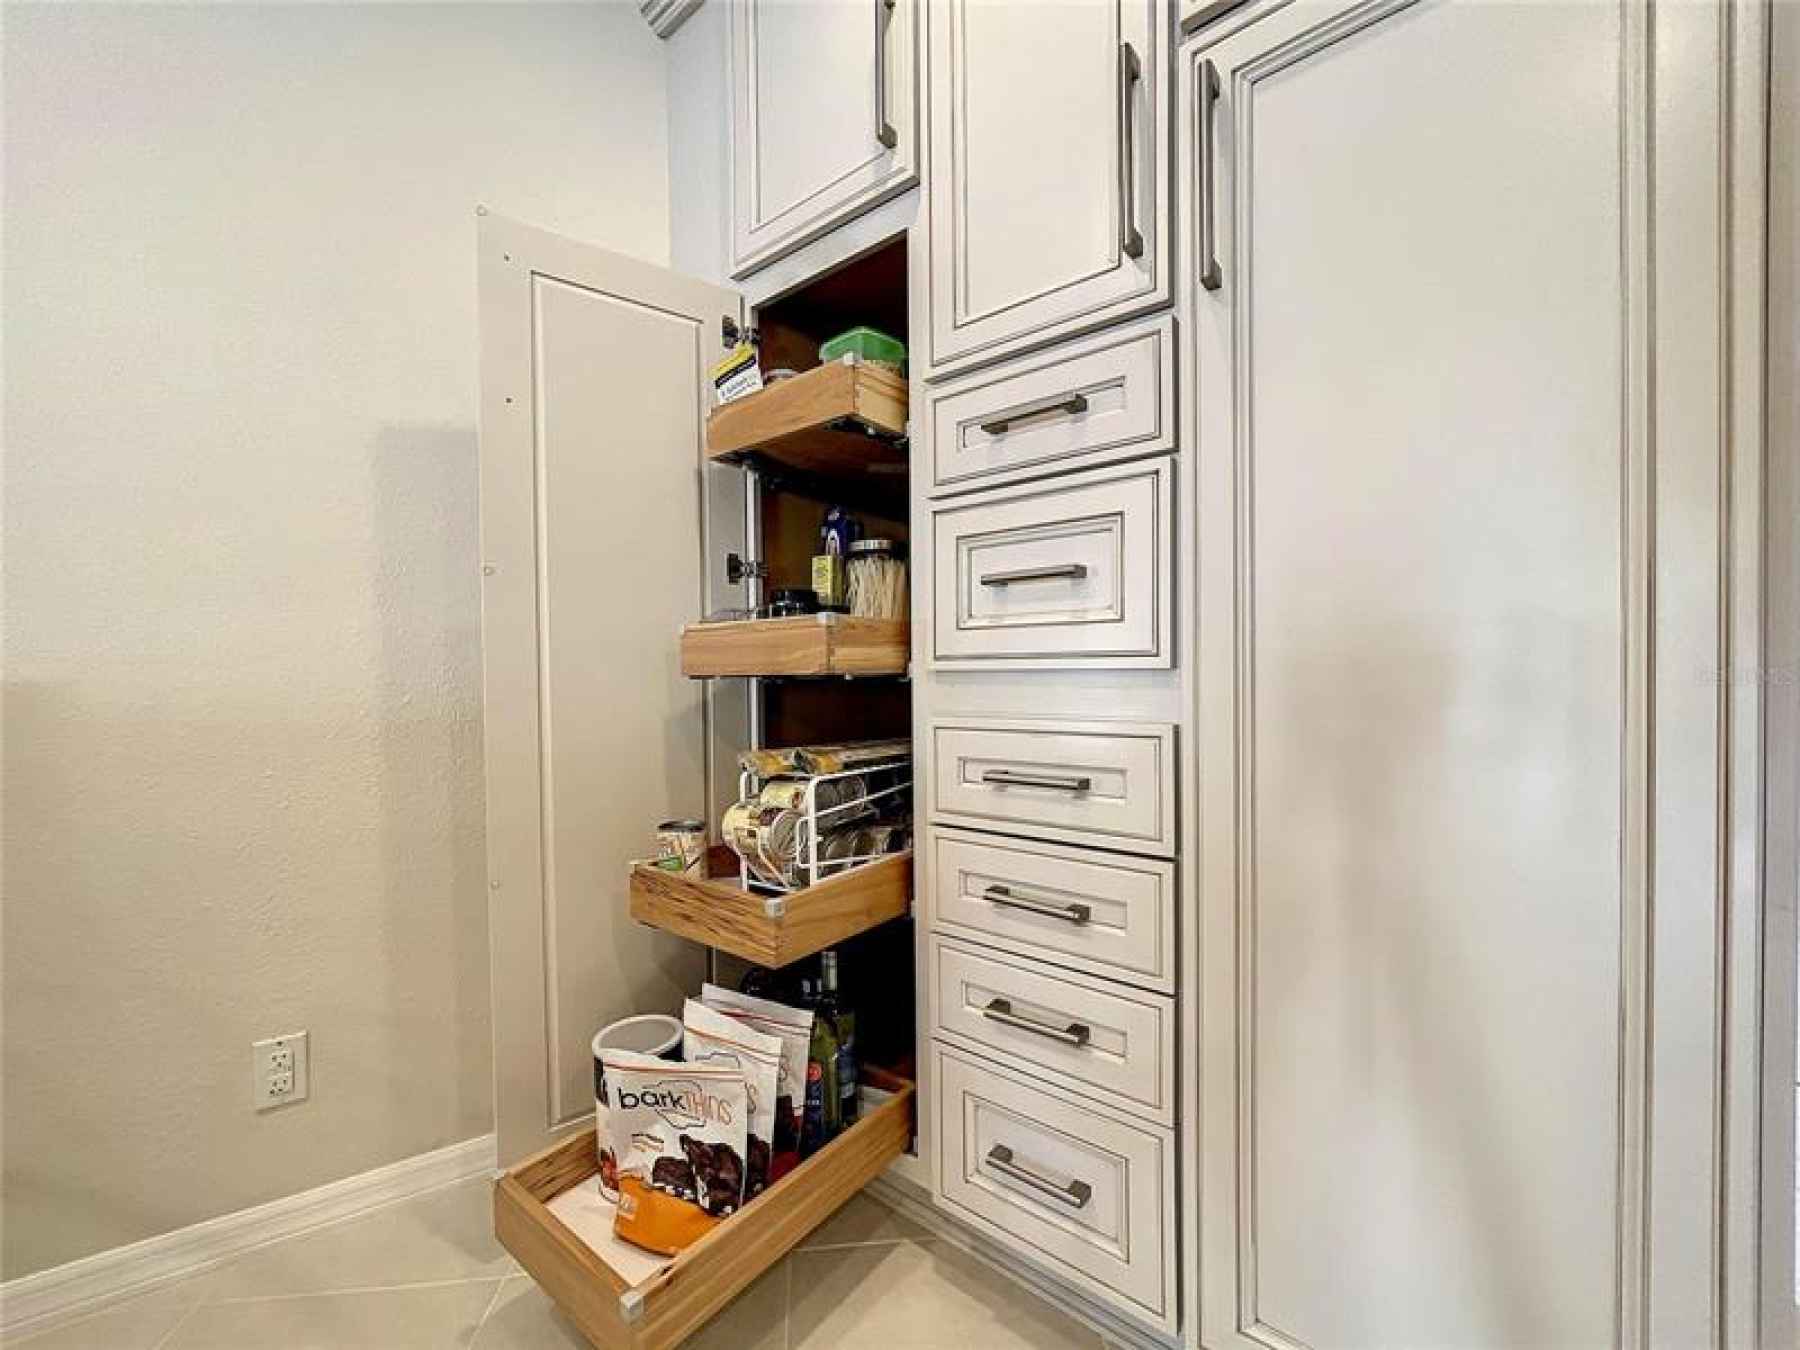 Spacious pantry with pull-out shelves